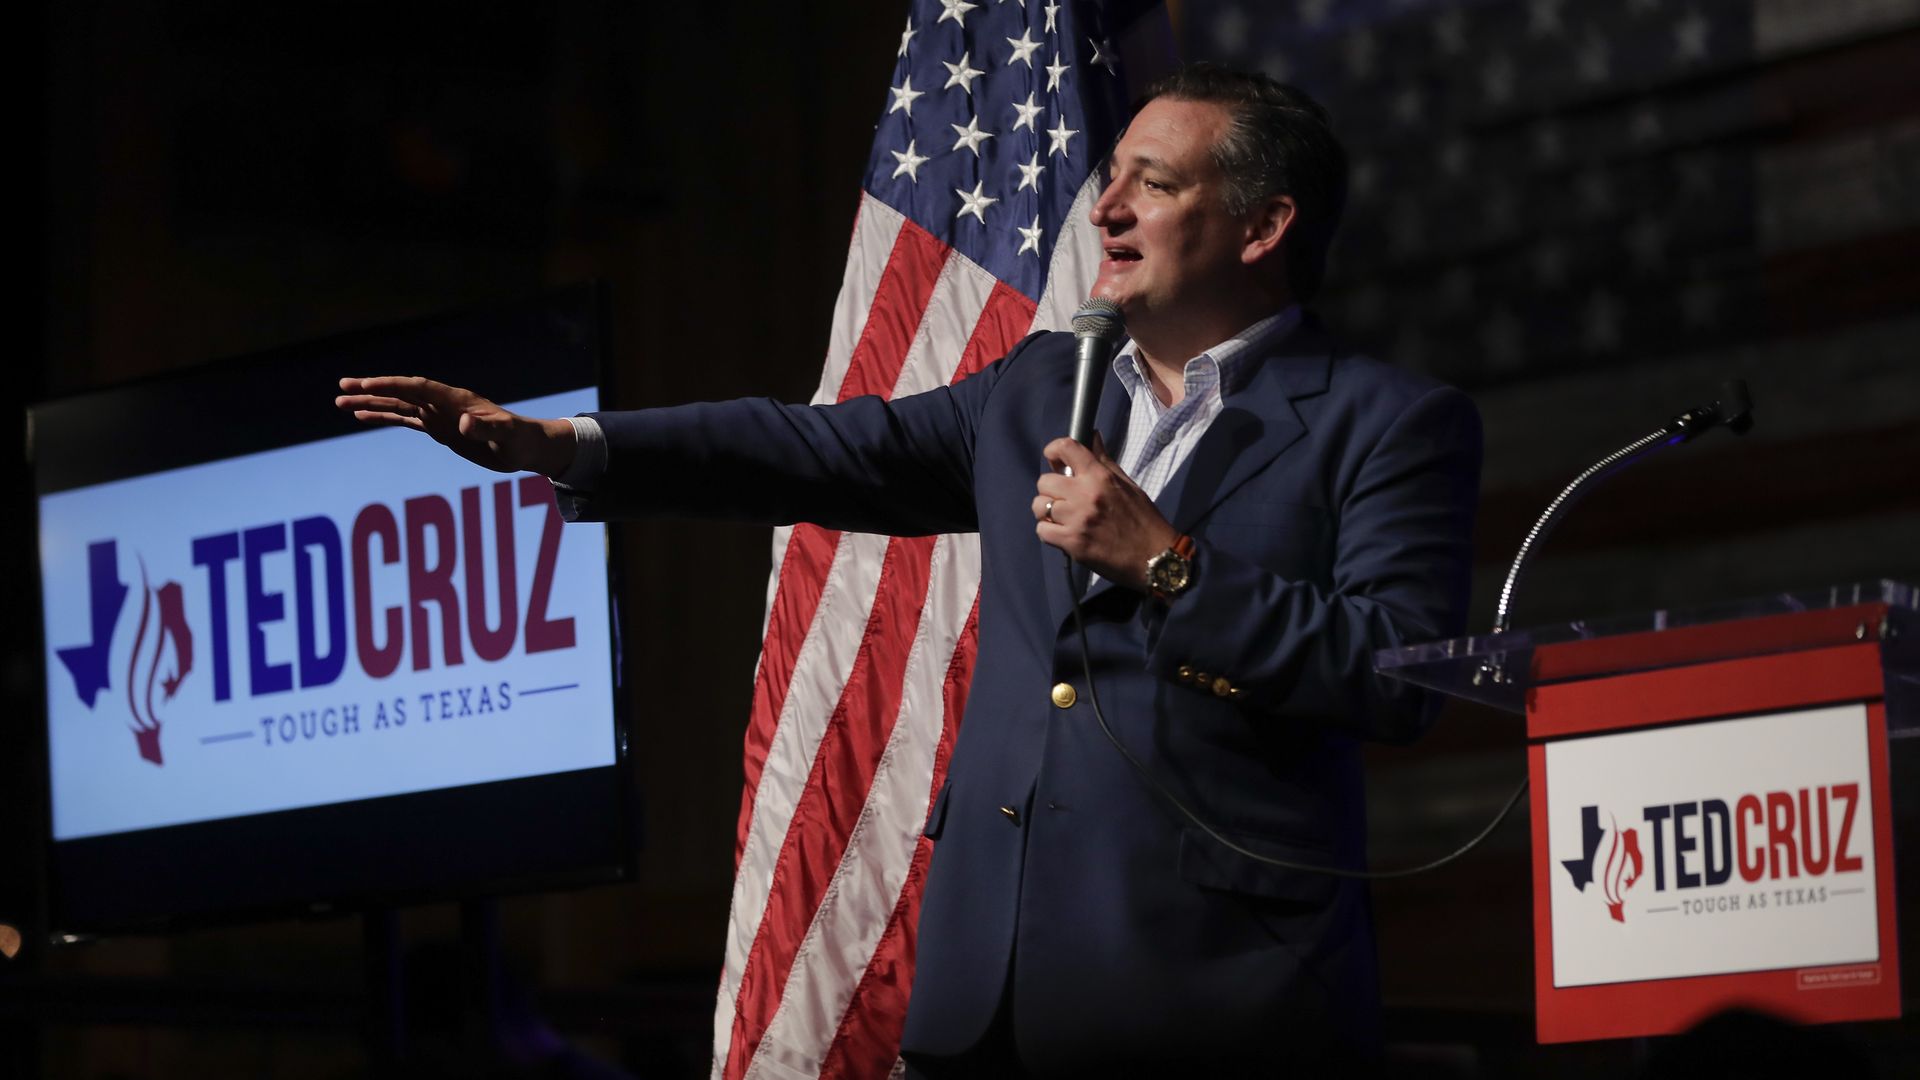 Ted Cruz holding a microphone in one hand and his other arm is outstretched, palm down